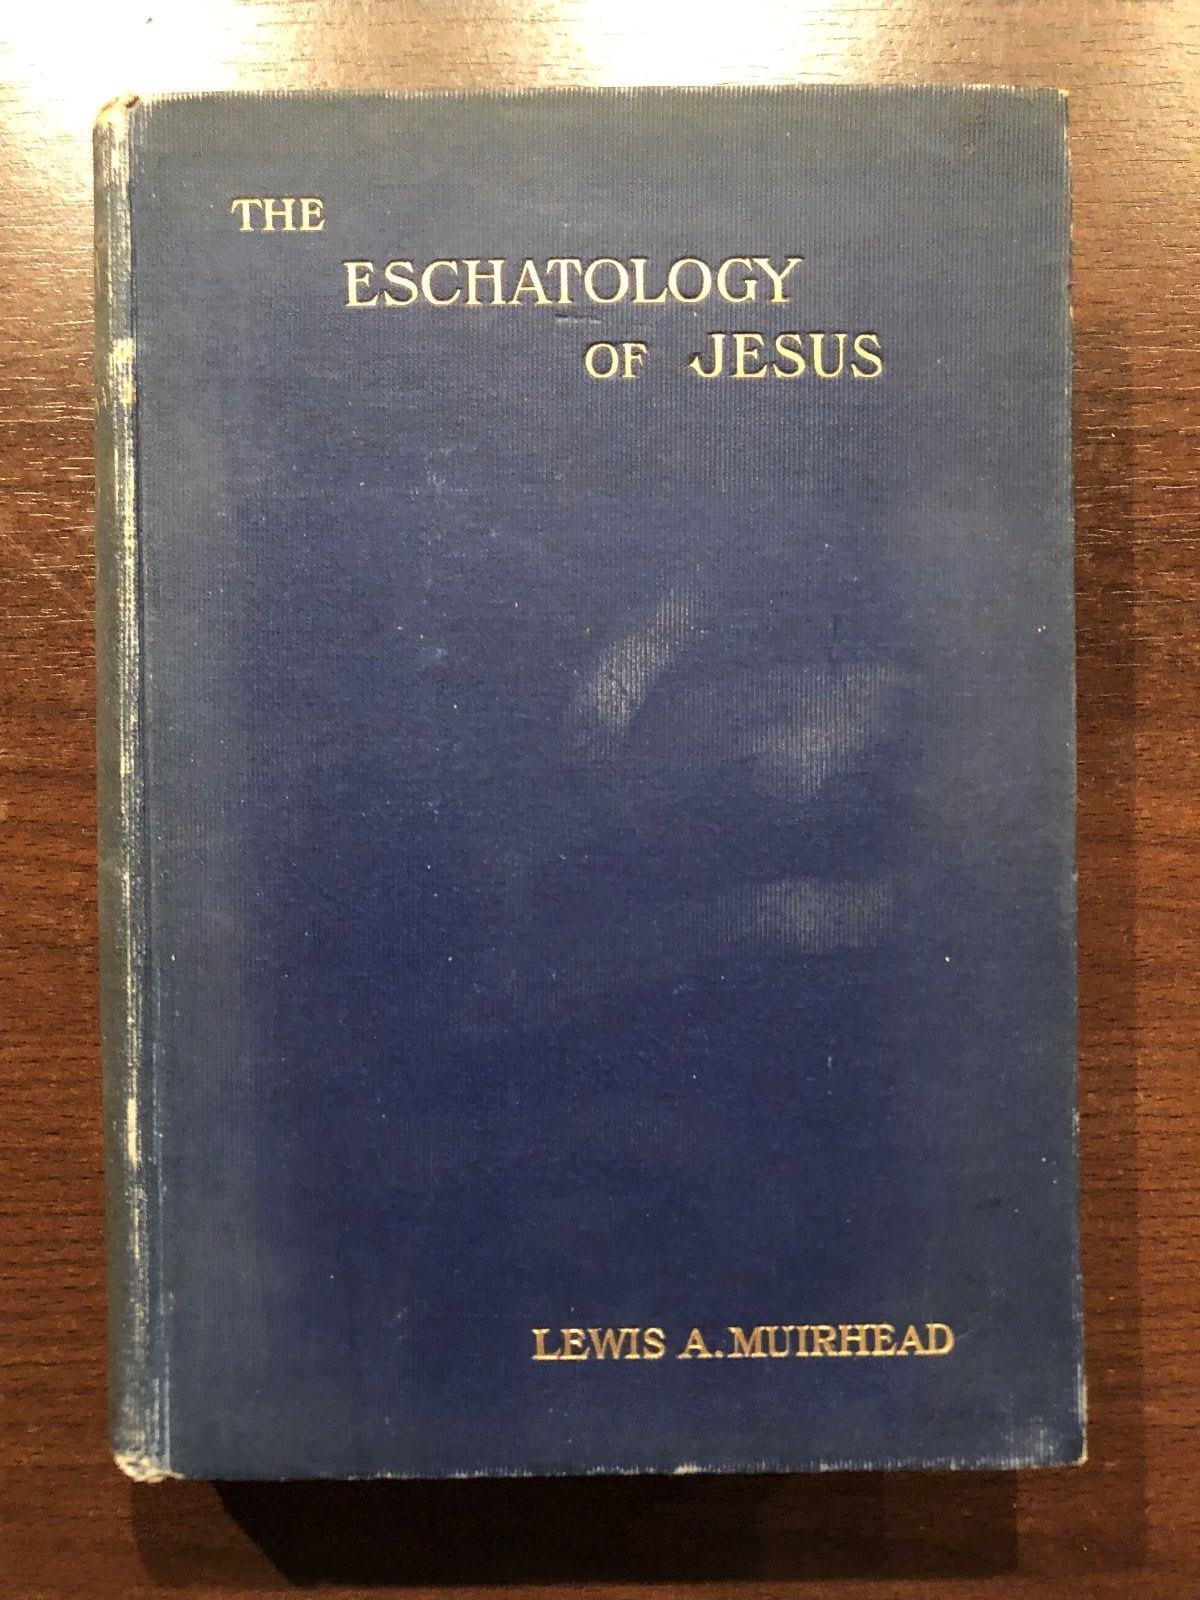 THE ESCHATOLOGY OF JESUS by LEWIS A. MUIRHEAD - ANDREW MELROSE - H/B - 1904